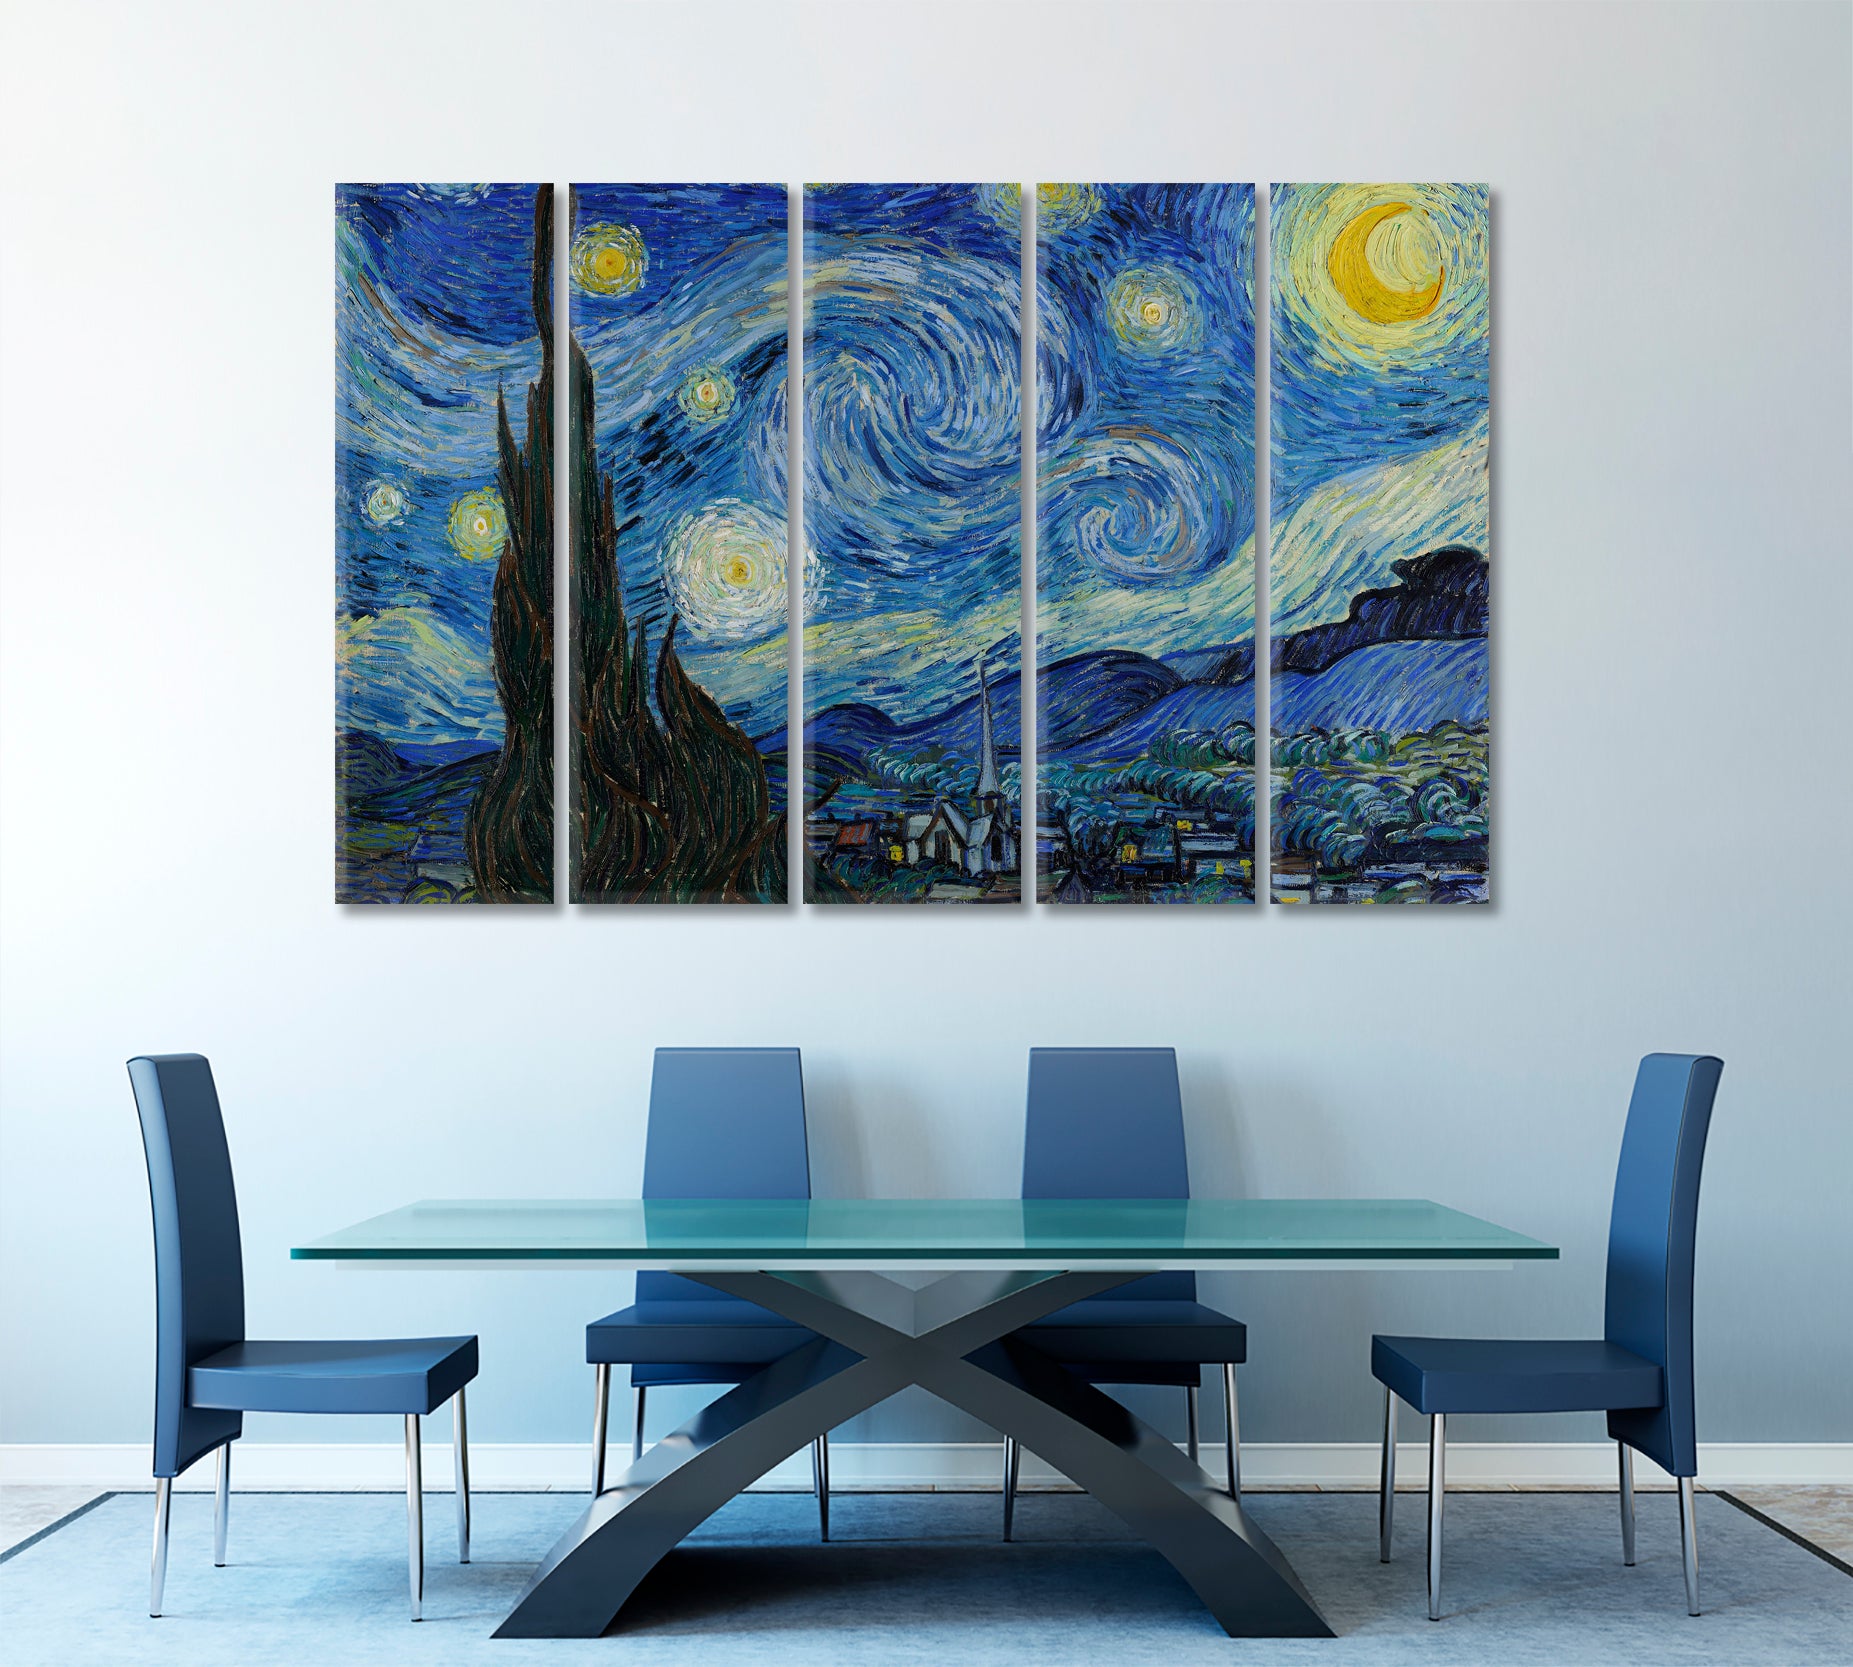 The Starry Night Vincent van Gogh Masterpieces Reproduction Contemporary Art Artesty   